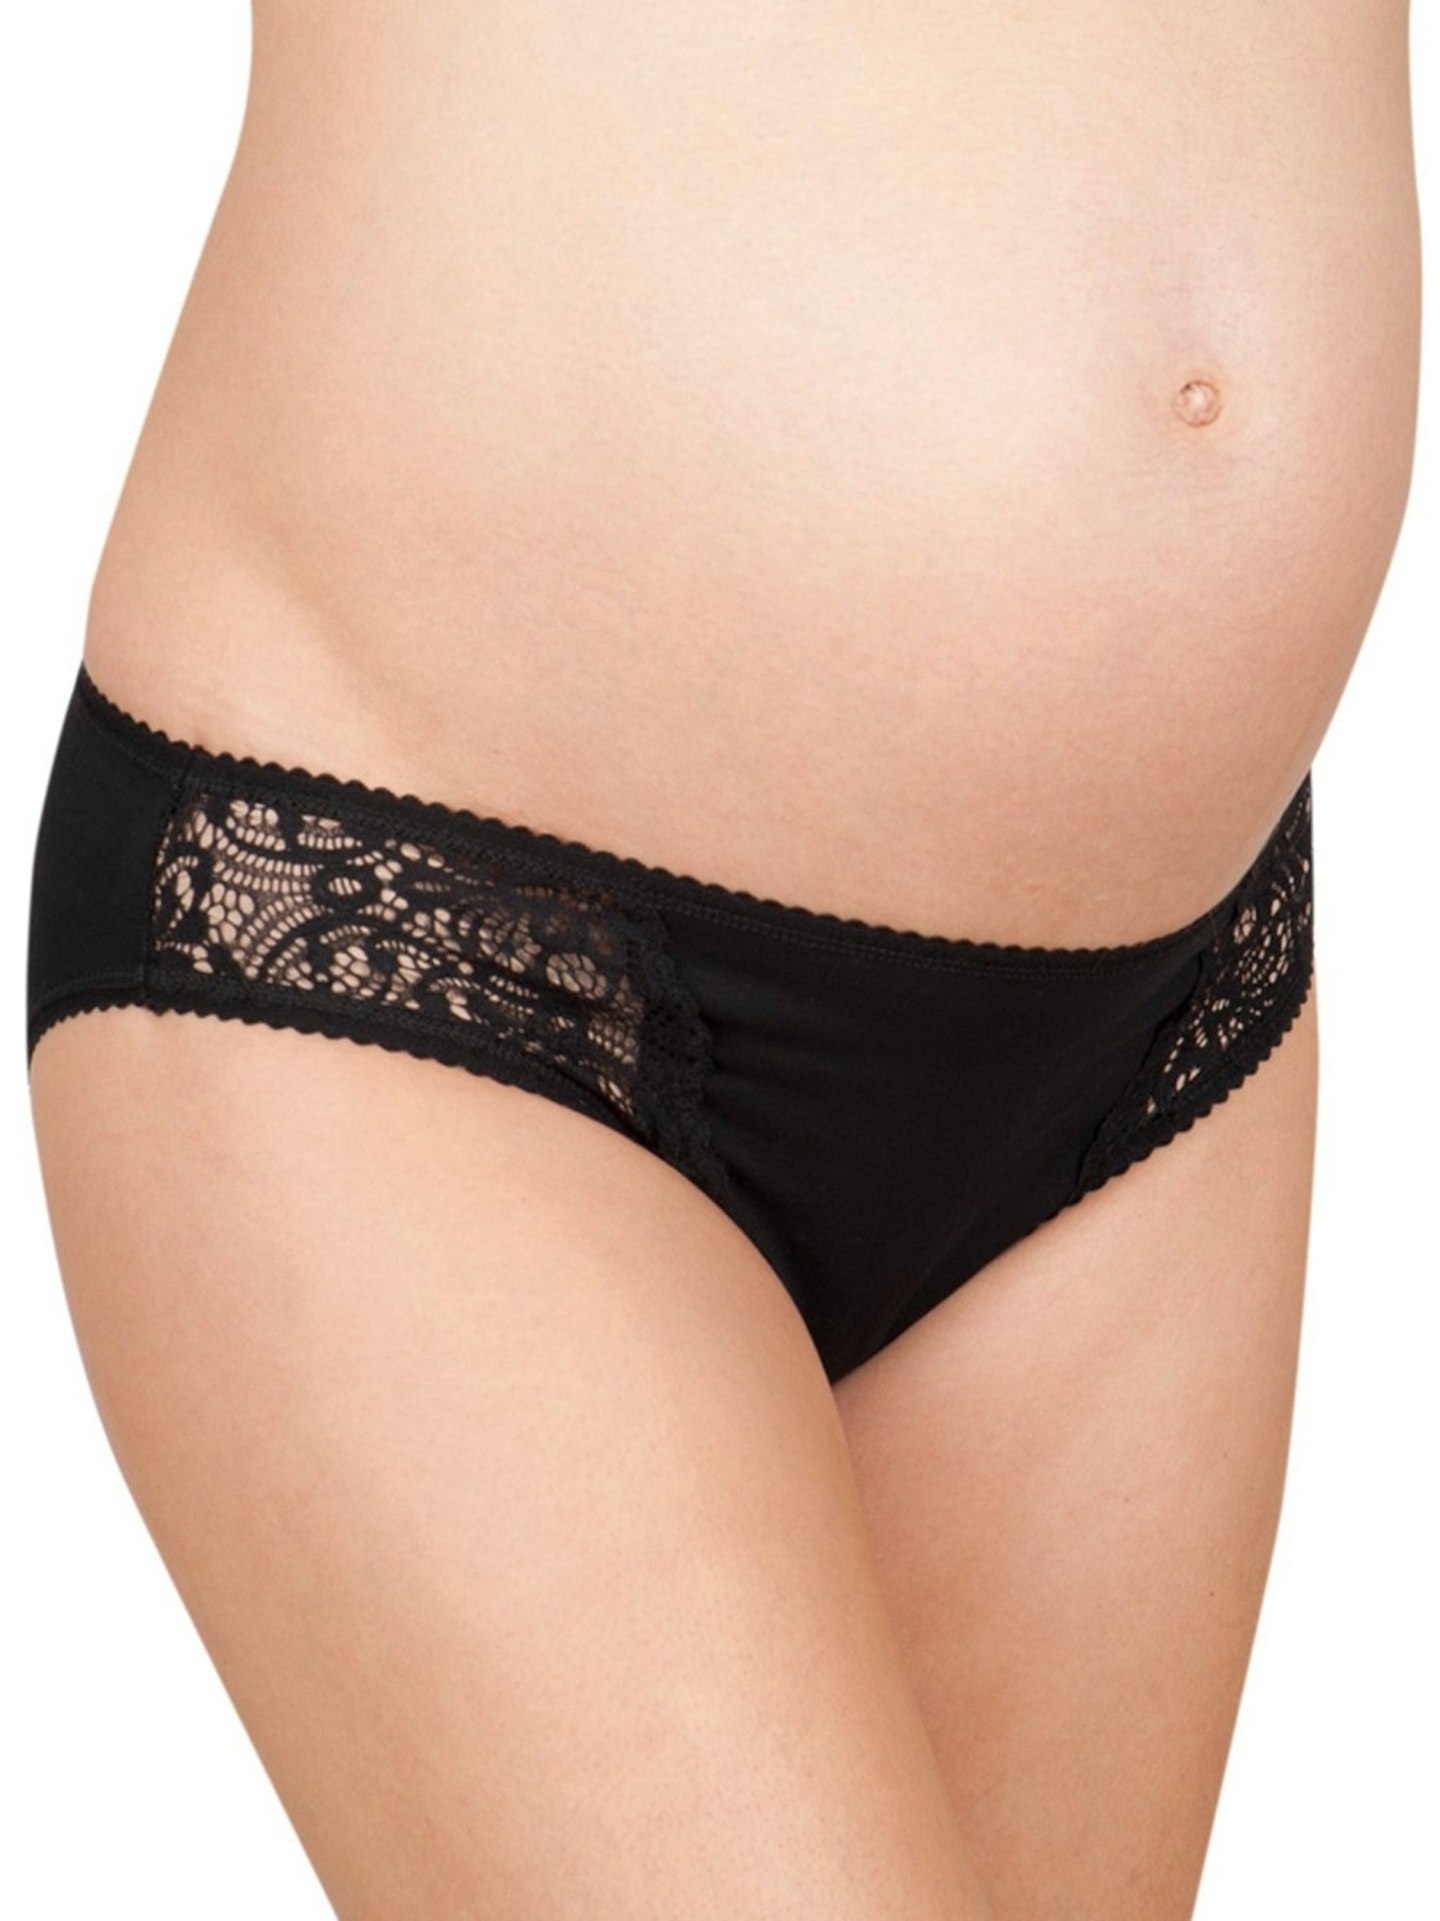 The Best Maternity Underwear For Pregnancy And Beyond